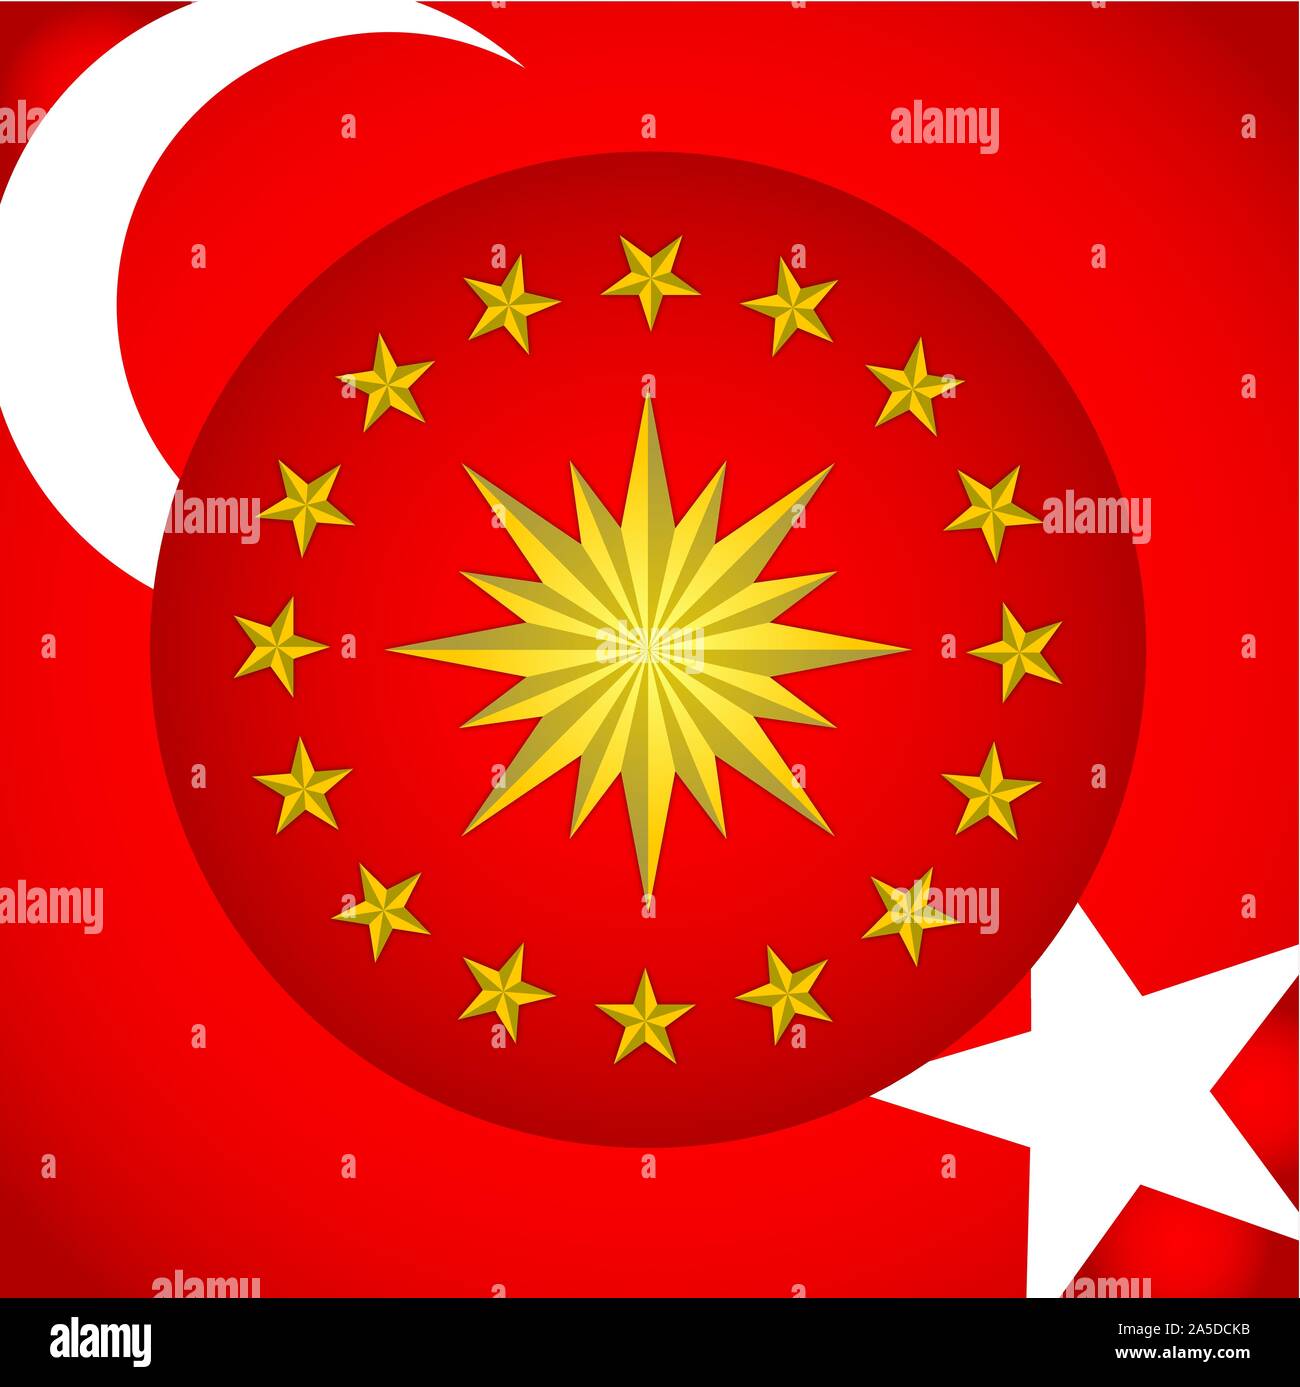 Turkey official presidential coat of arms and flag, vector illustration Stock Vector